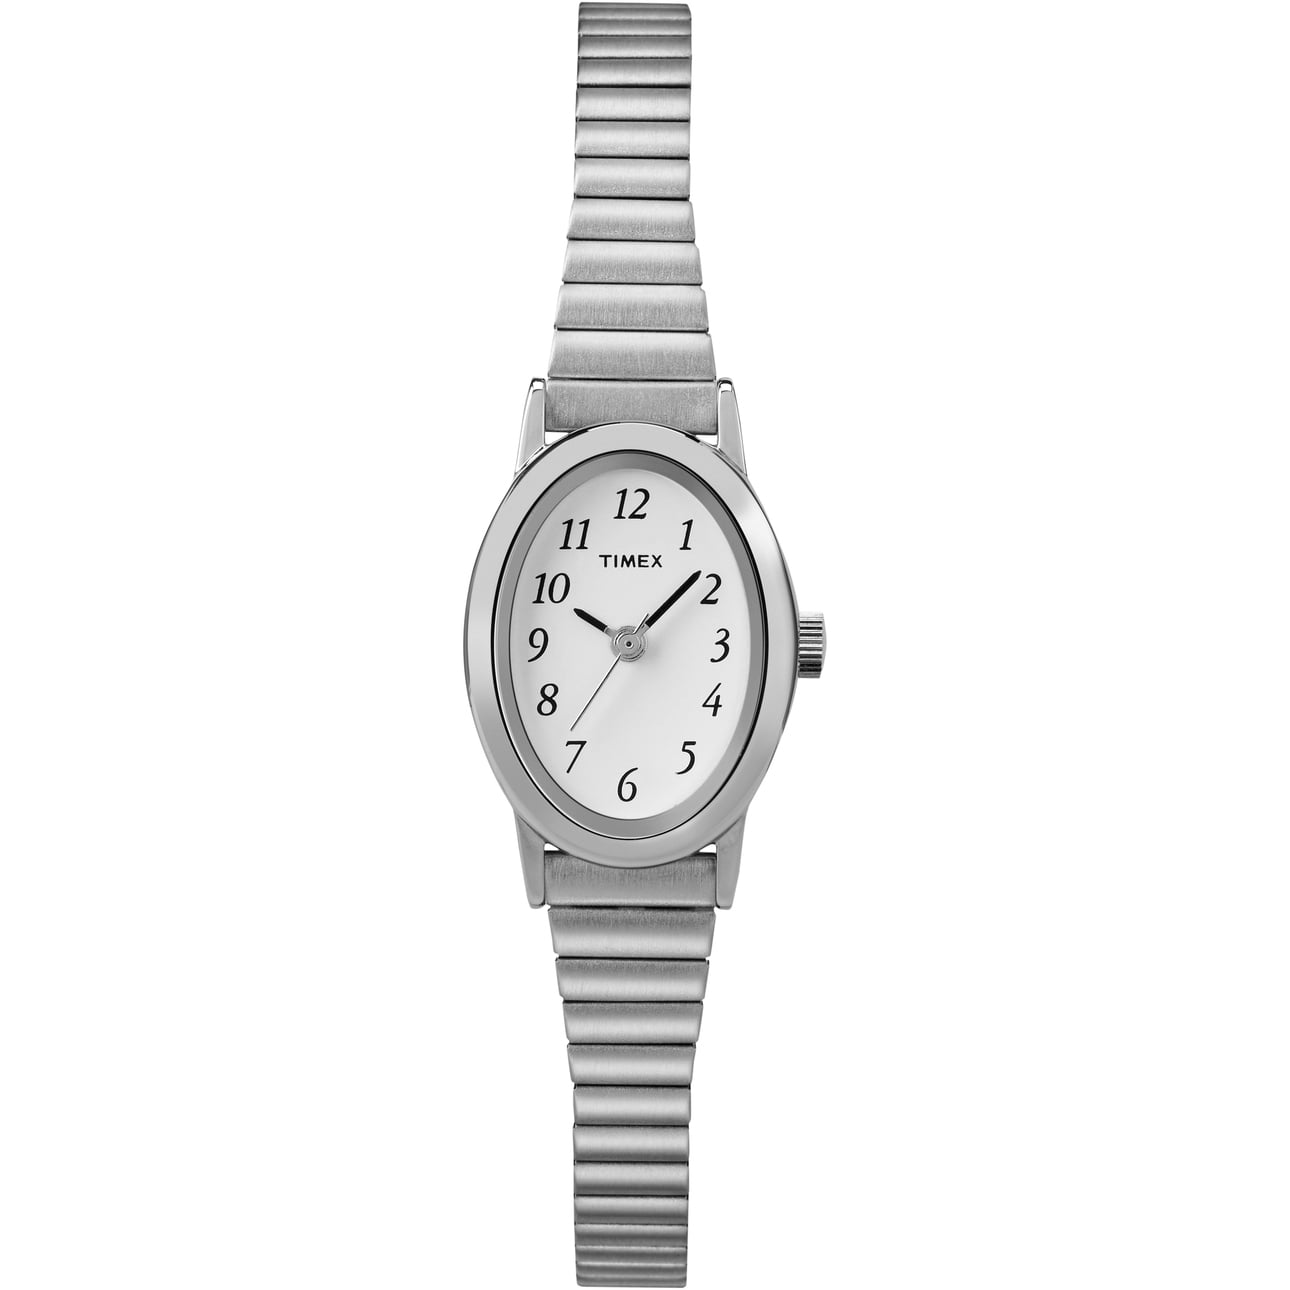 Timex Women's Cavatina Silver-Tone 18mm Classic Watch, Expansion Band